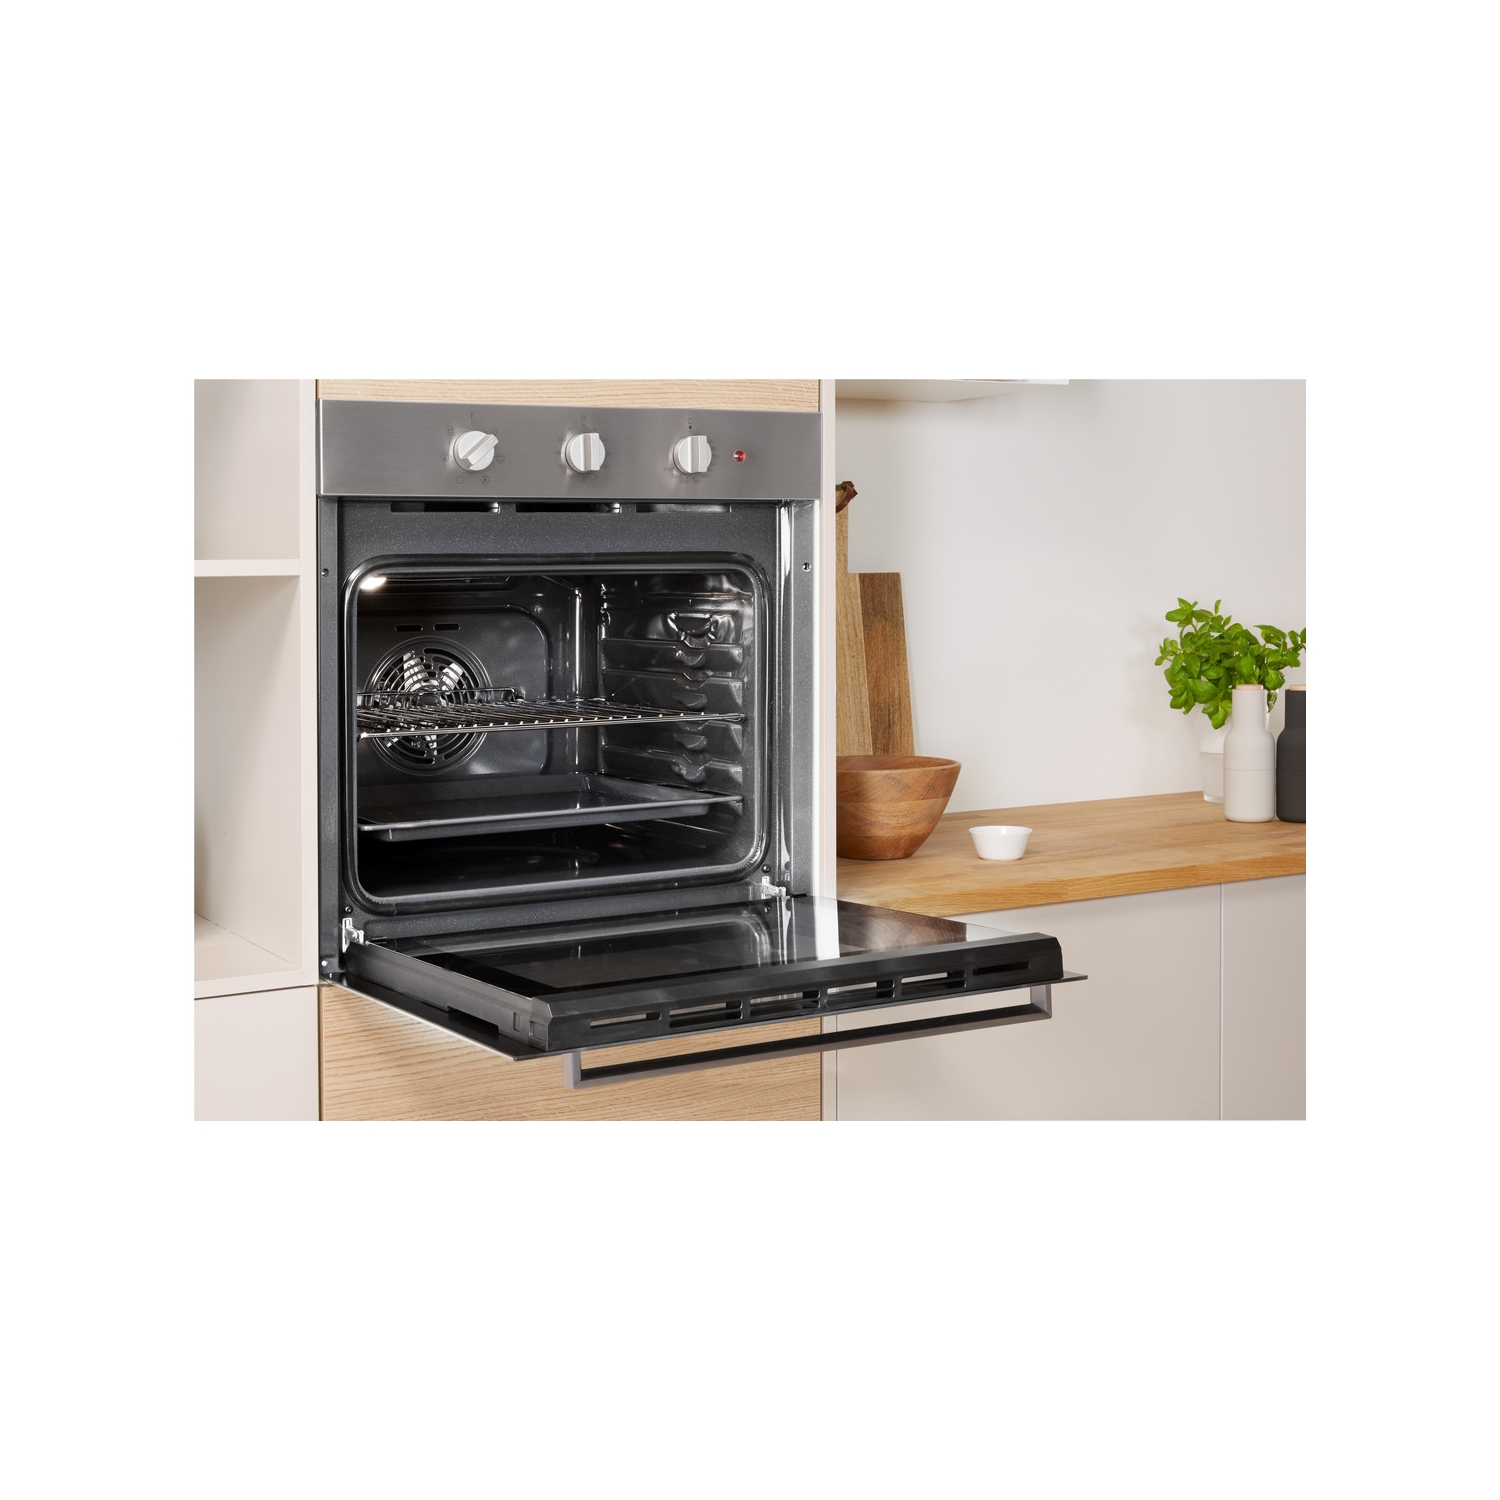 Indesit Built In Single Oven - Stainless Steel - 1